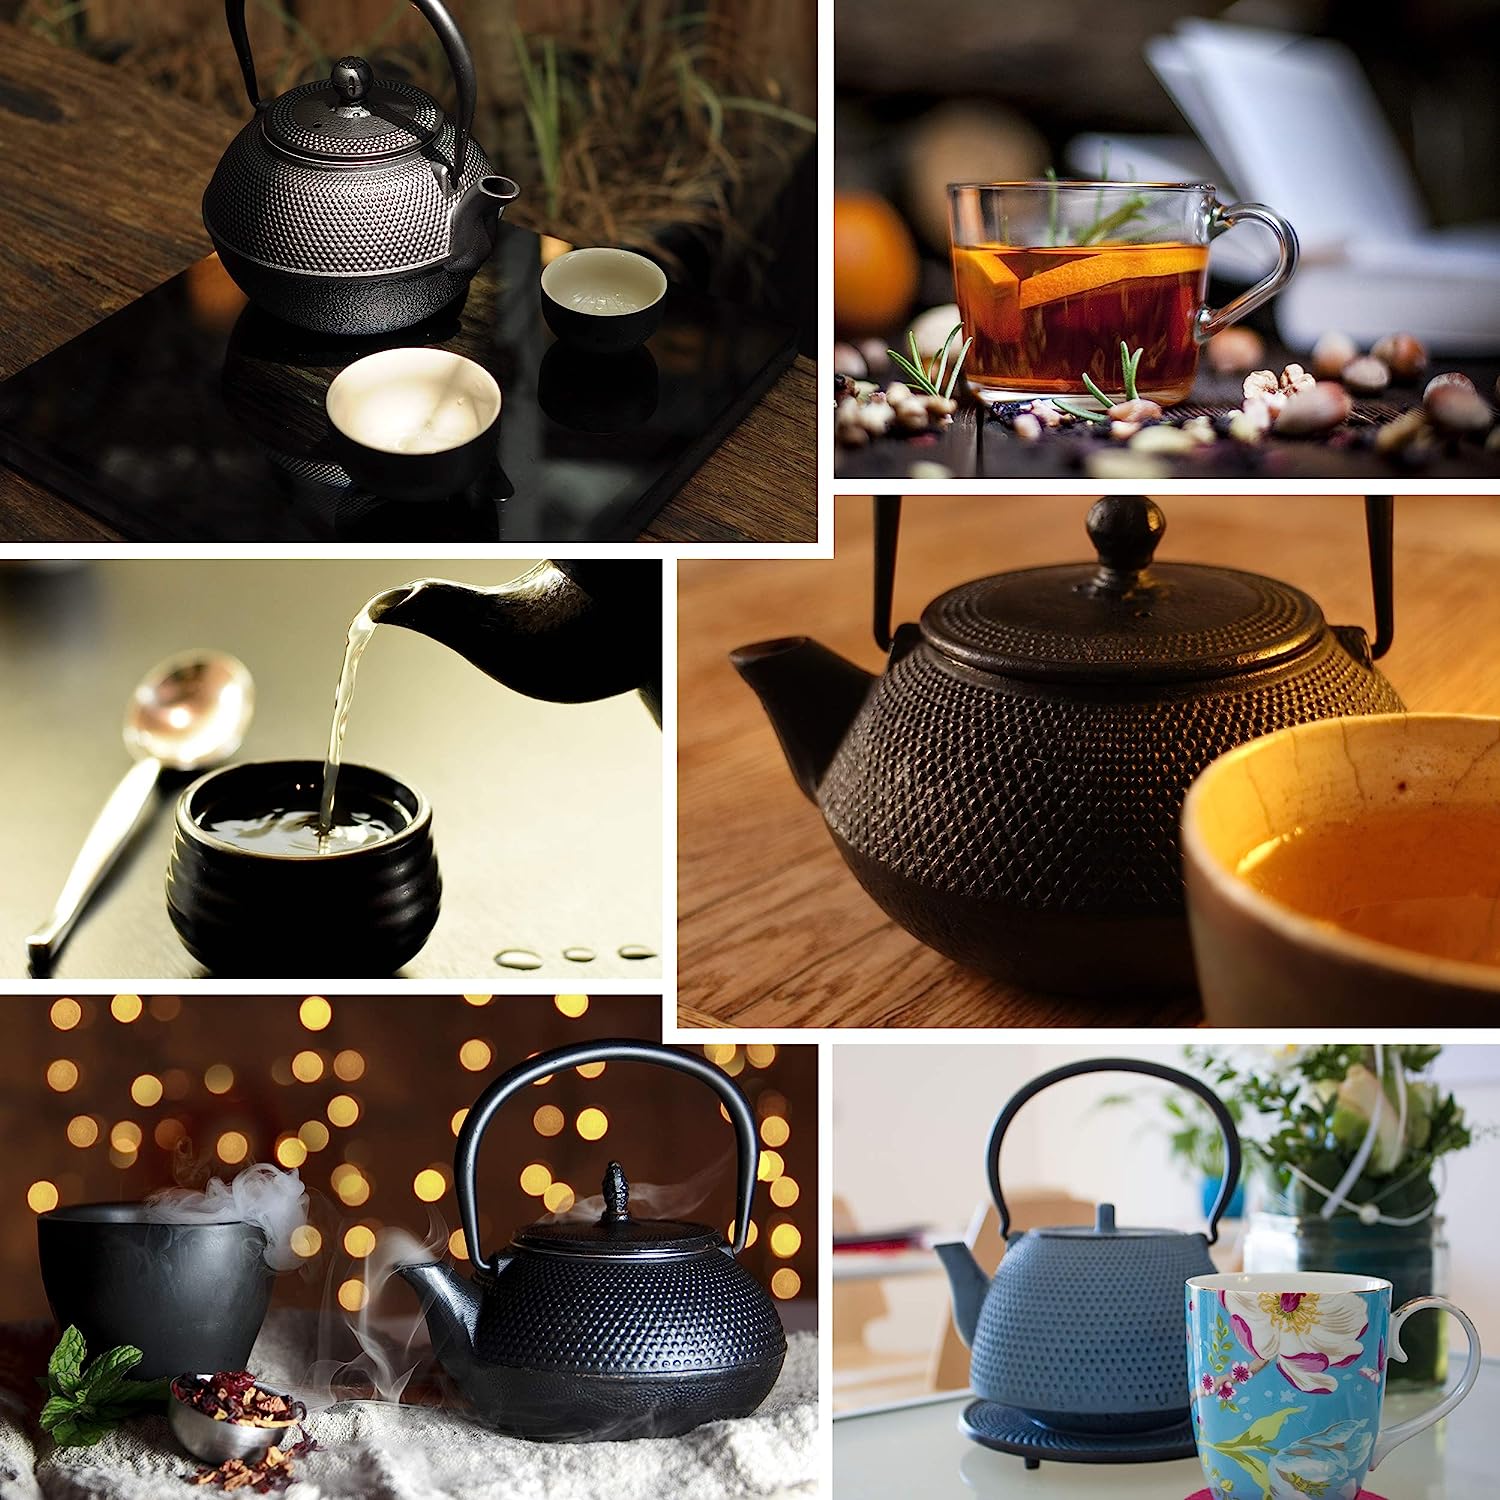 teeblume Cast Iron Teapot Arare Cast Iron Teapot with Strainer Includes Free Coaster in Black Teapot Fully Enamelled Inside Blue 900 ml